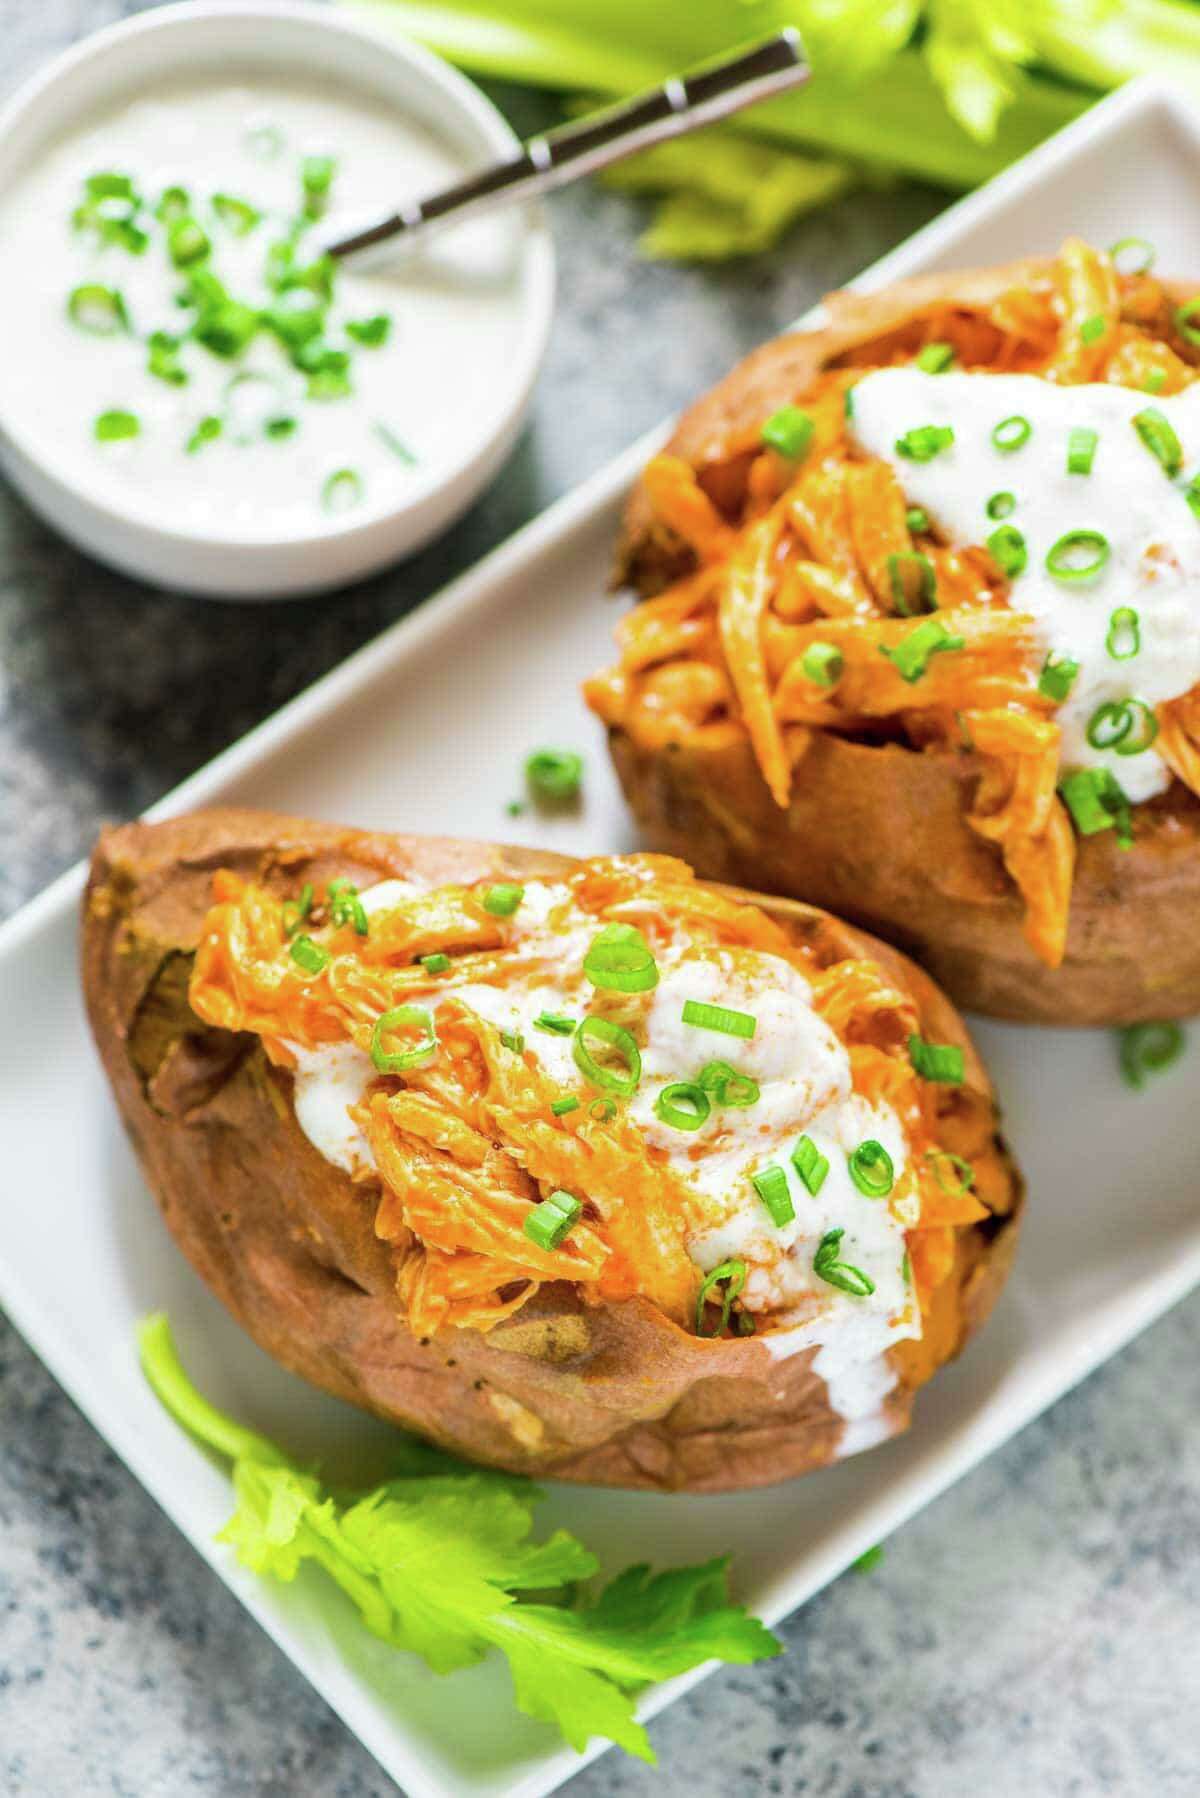 Buffalo Chicken Sweet Potatoes, by Erin Clarke, author of “The Well Plated Cookbook” and creator of the healthful recipe blog Well Plated by Erin, wellplated.com.